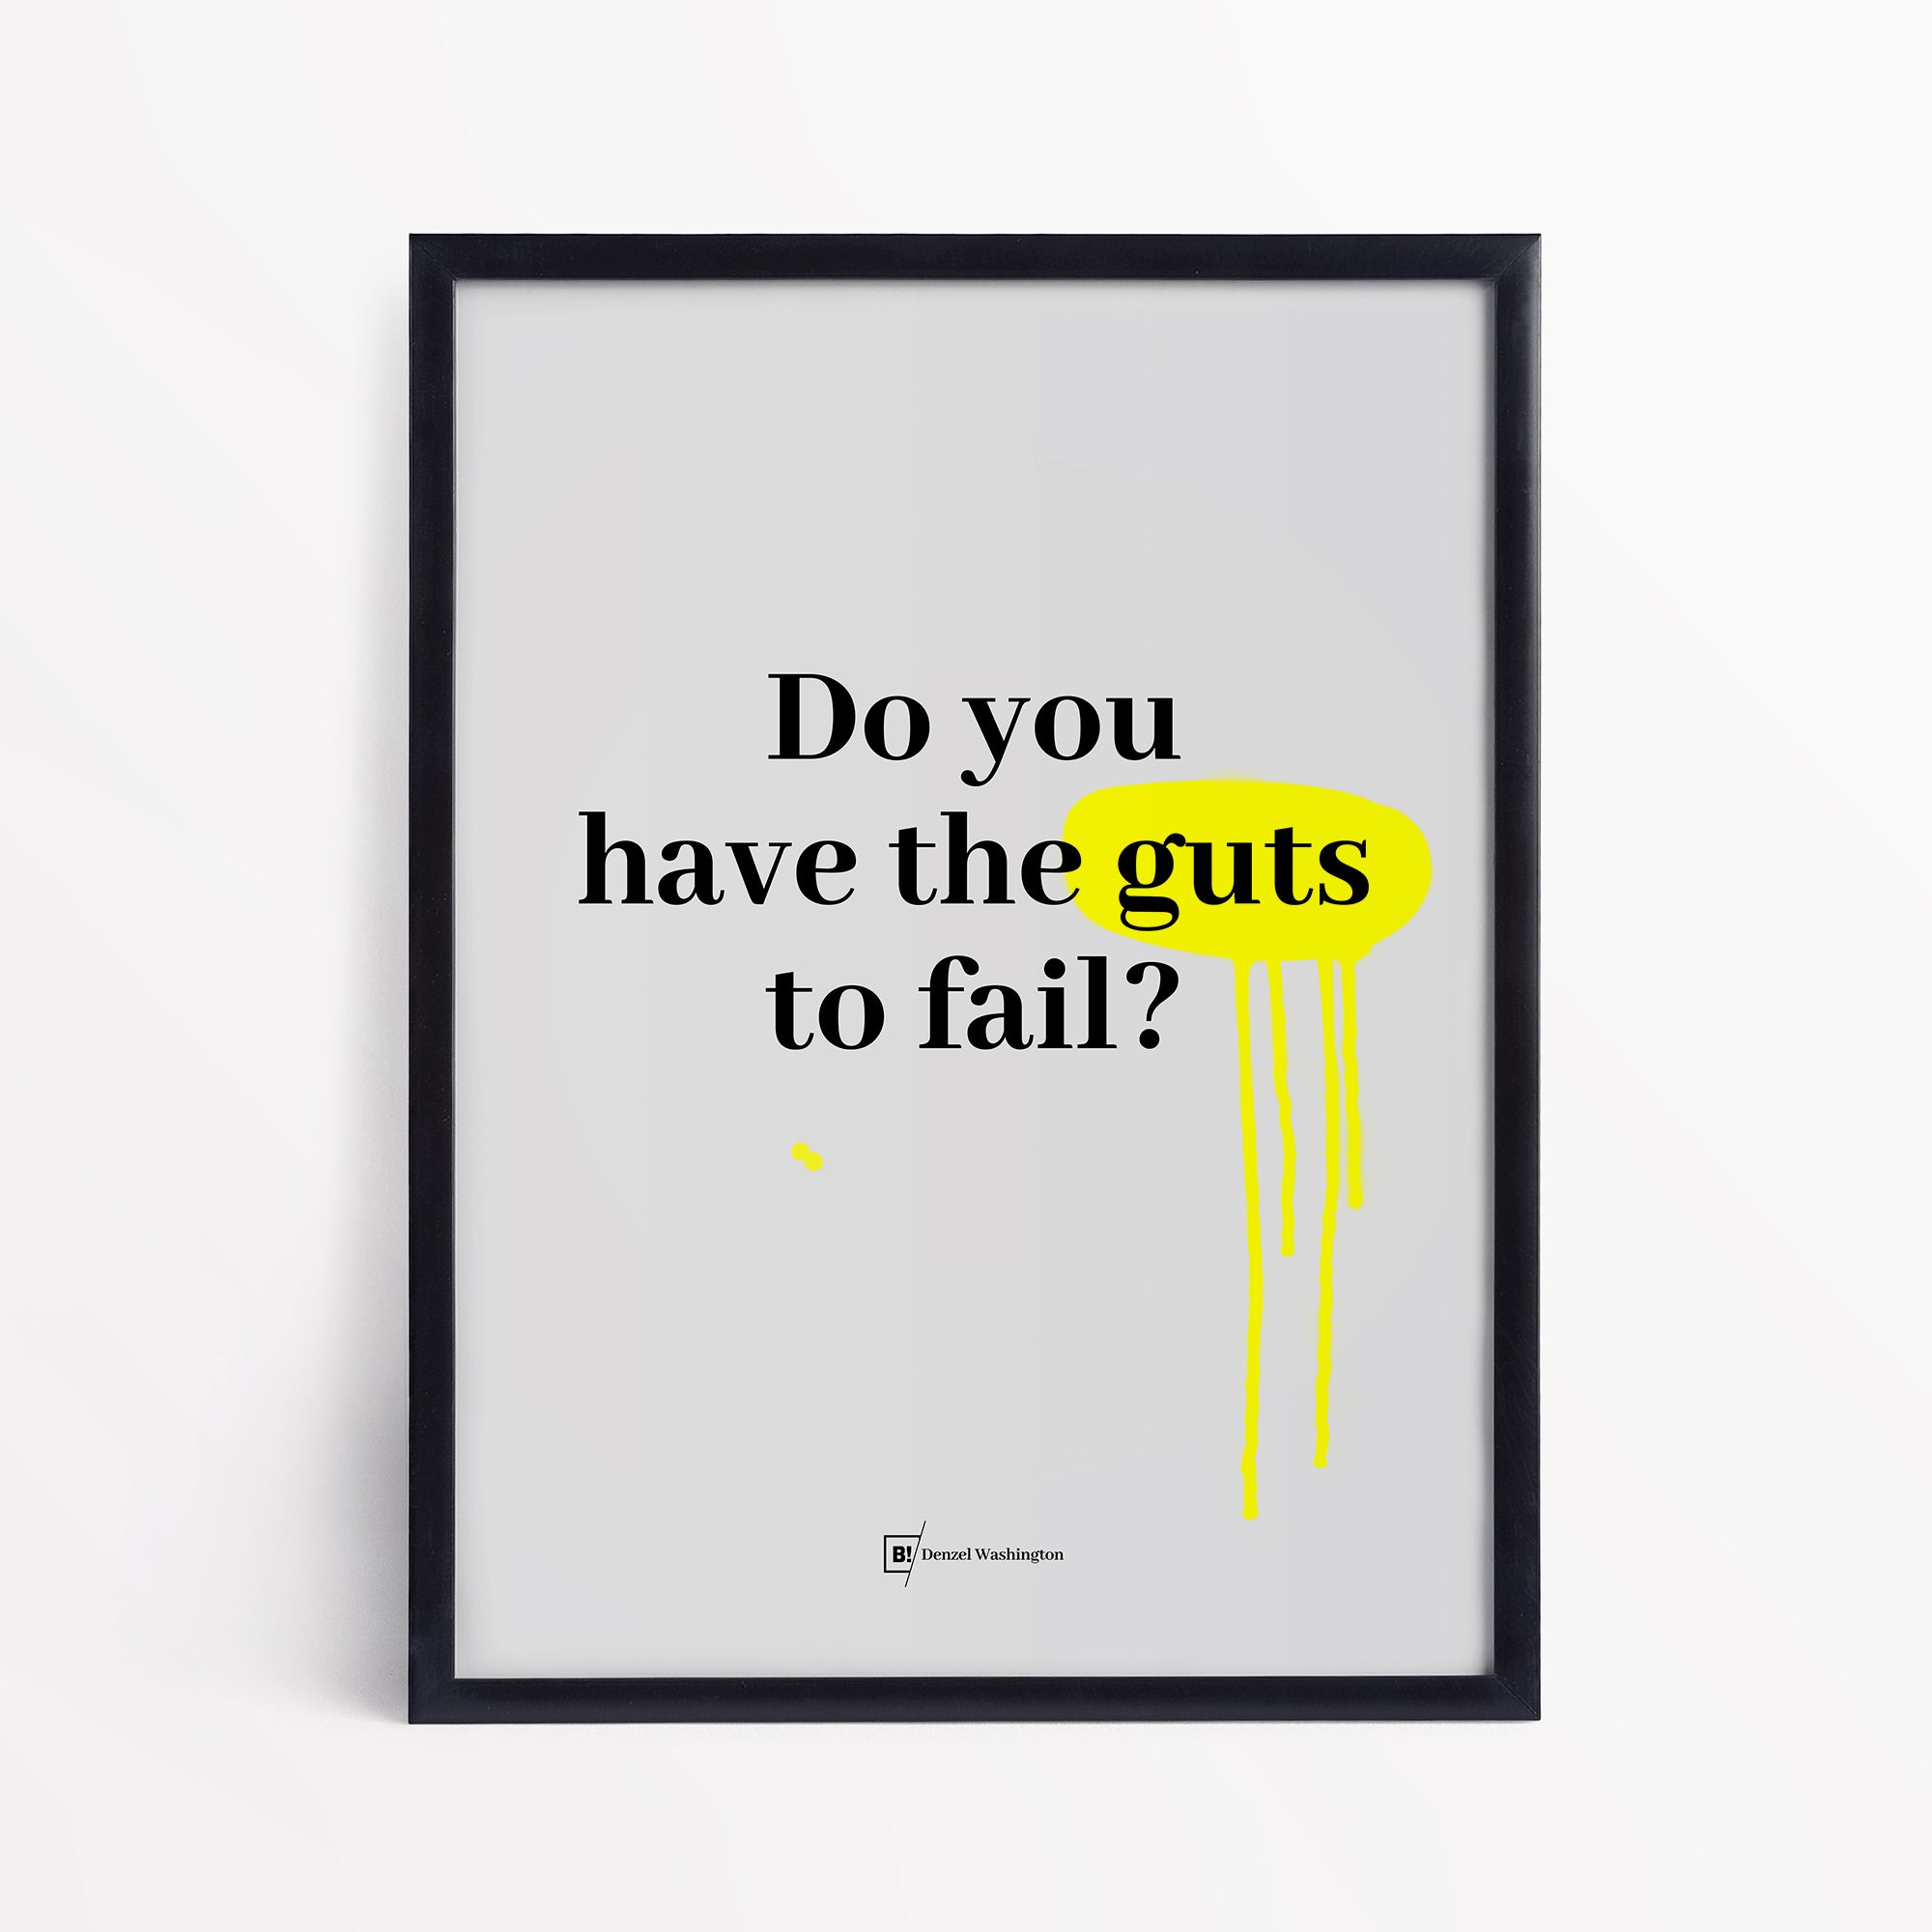 Be inspired by Denzel Washington's famous "Do you have the guts to fail?" quote art print. This artwork was printed using the giclée process on archival acid-free paper and is presented in a simple black frame that captures its timeless beauty in every detail.